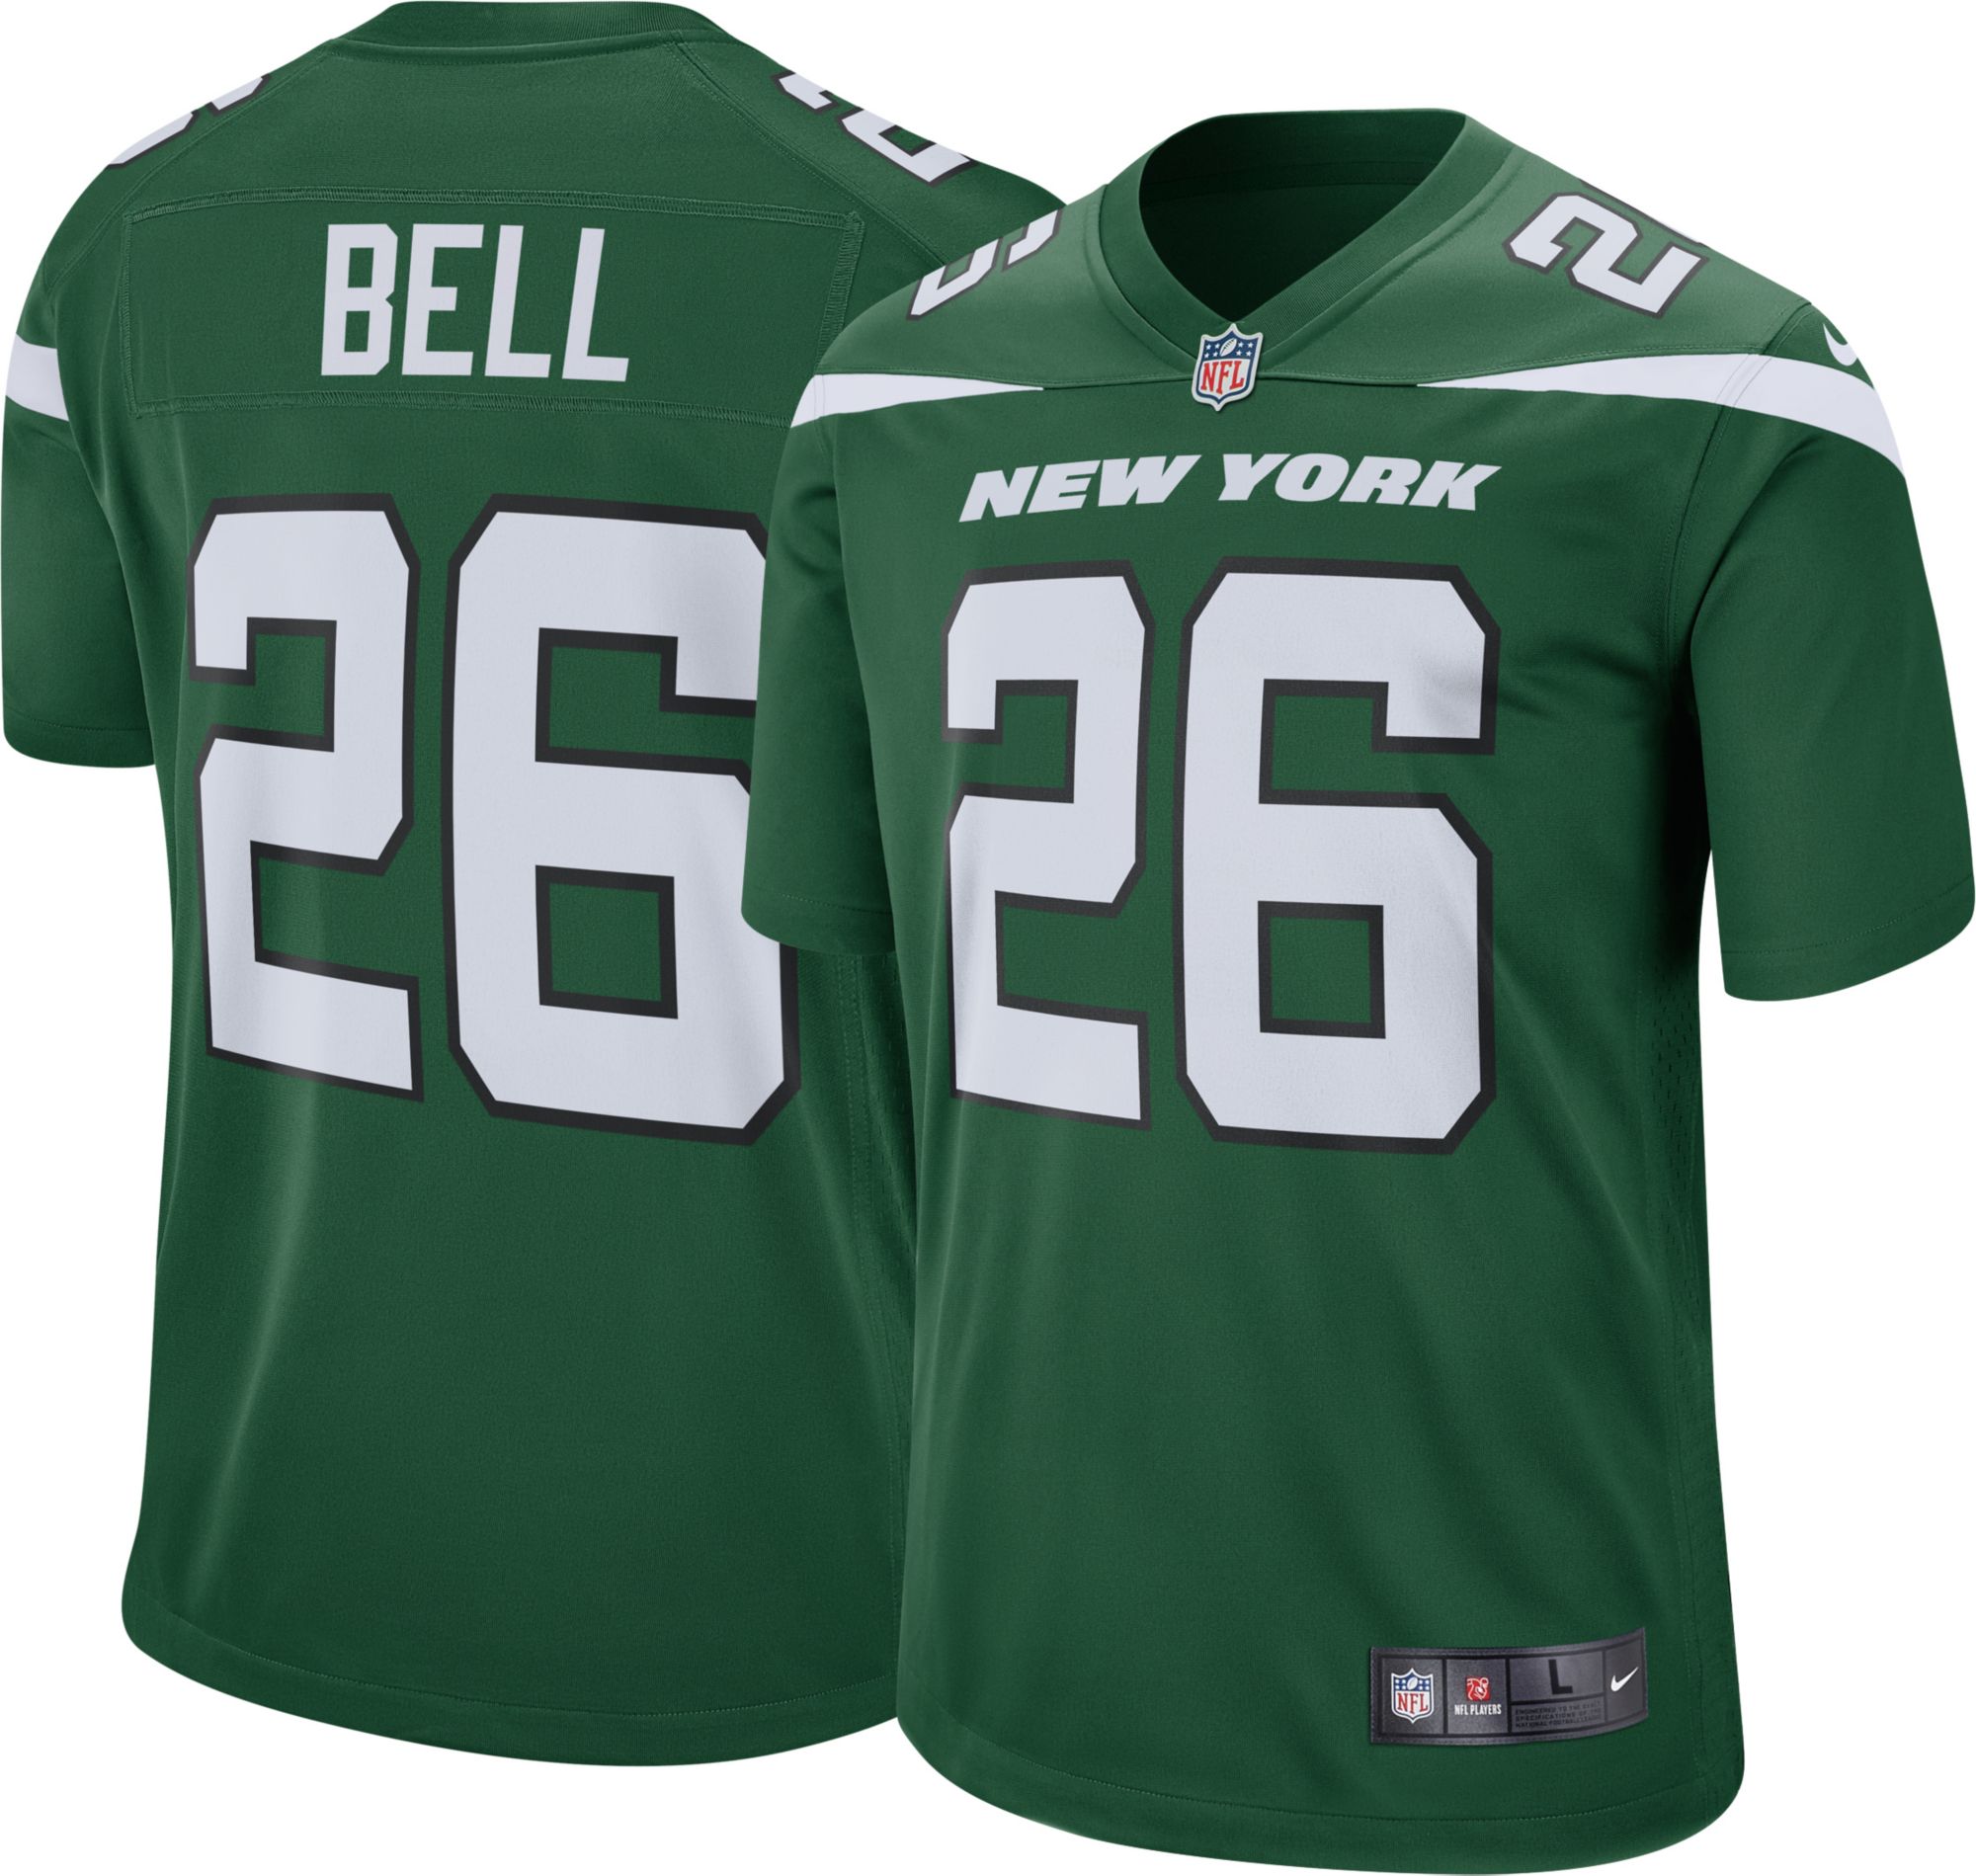 New York Jets Le'Veon Bell #26 